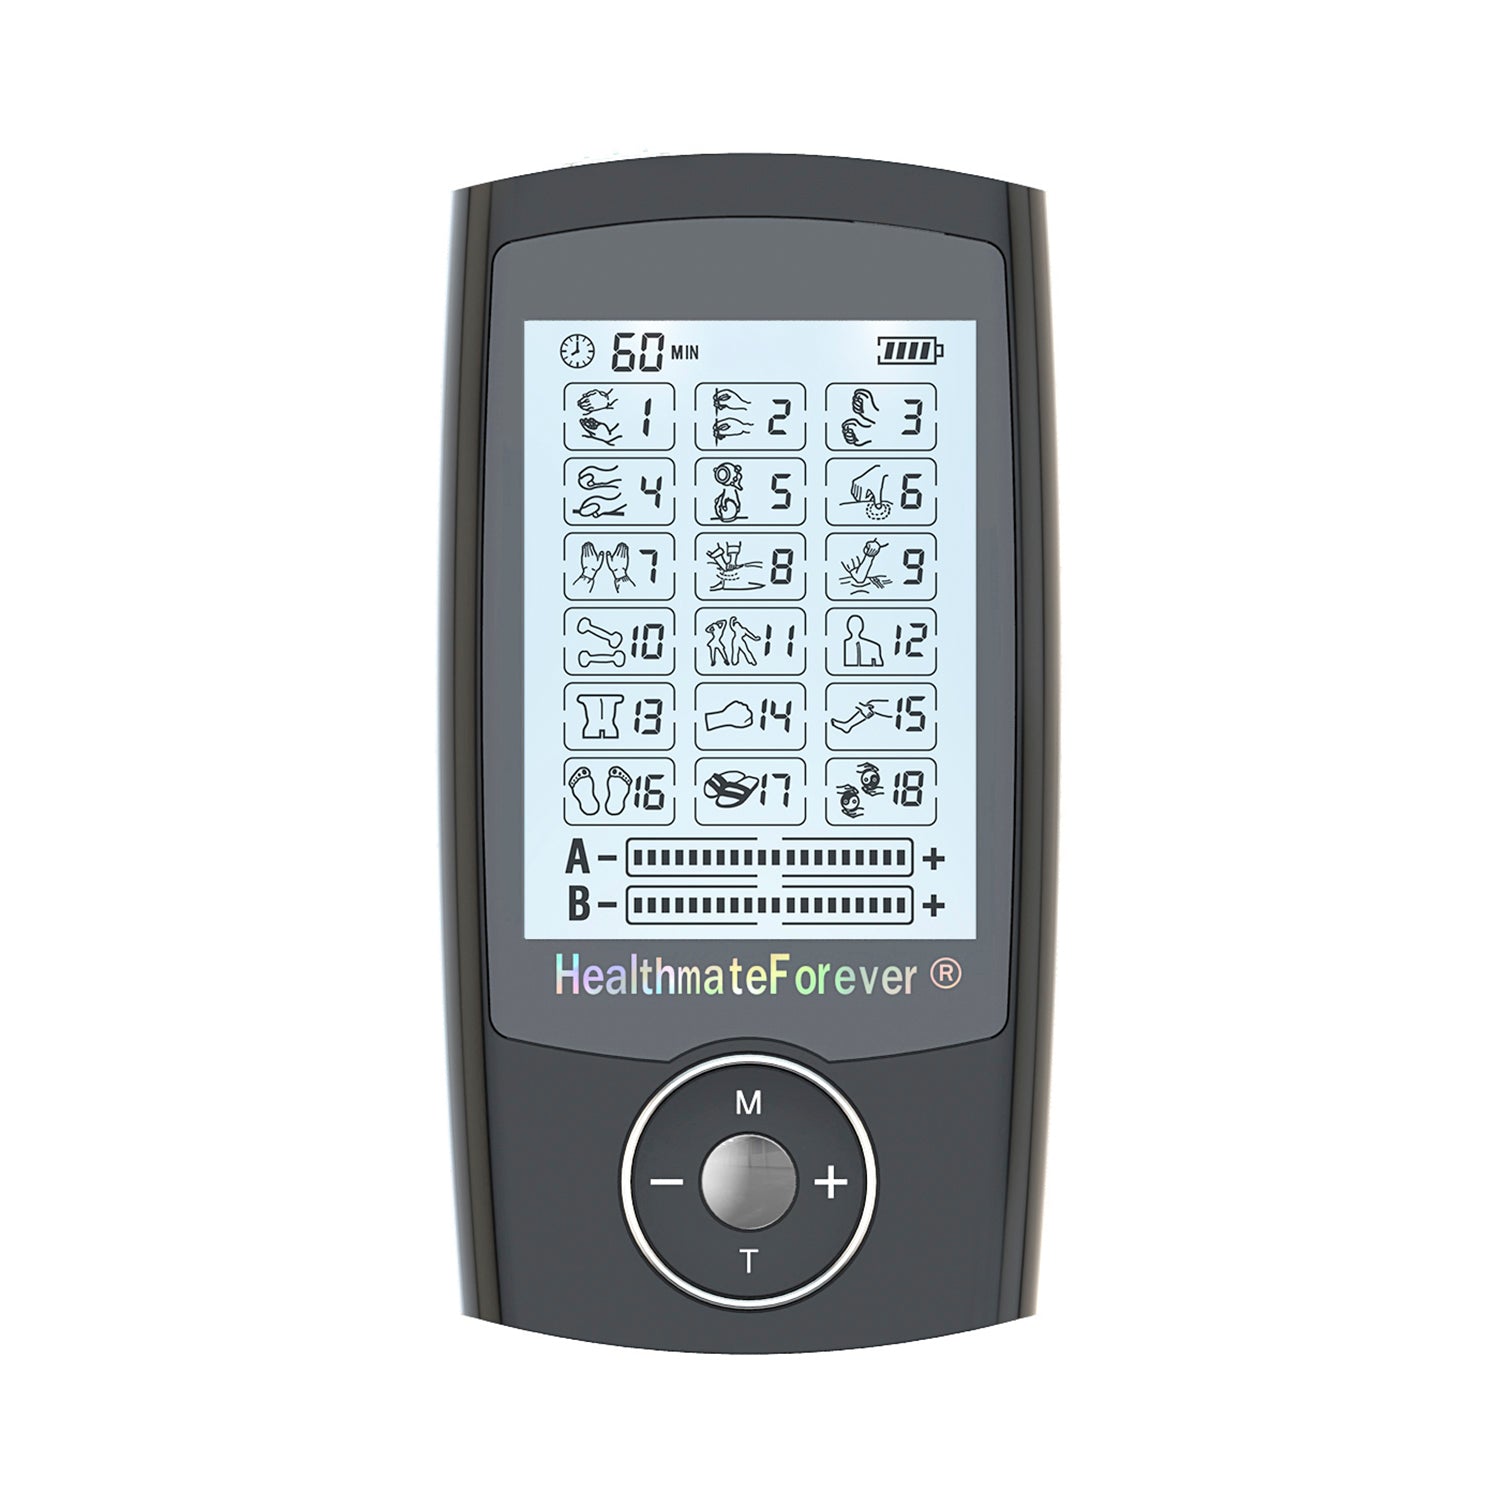  TENS Unit Muscle Stimulator Machine, Ten Devices for